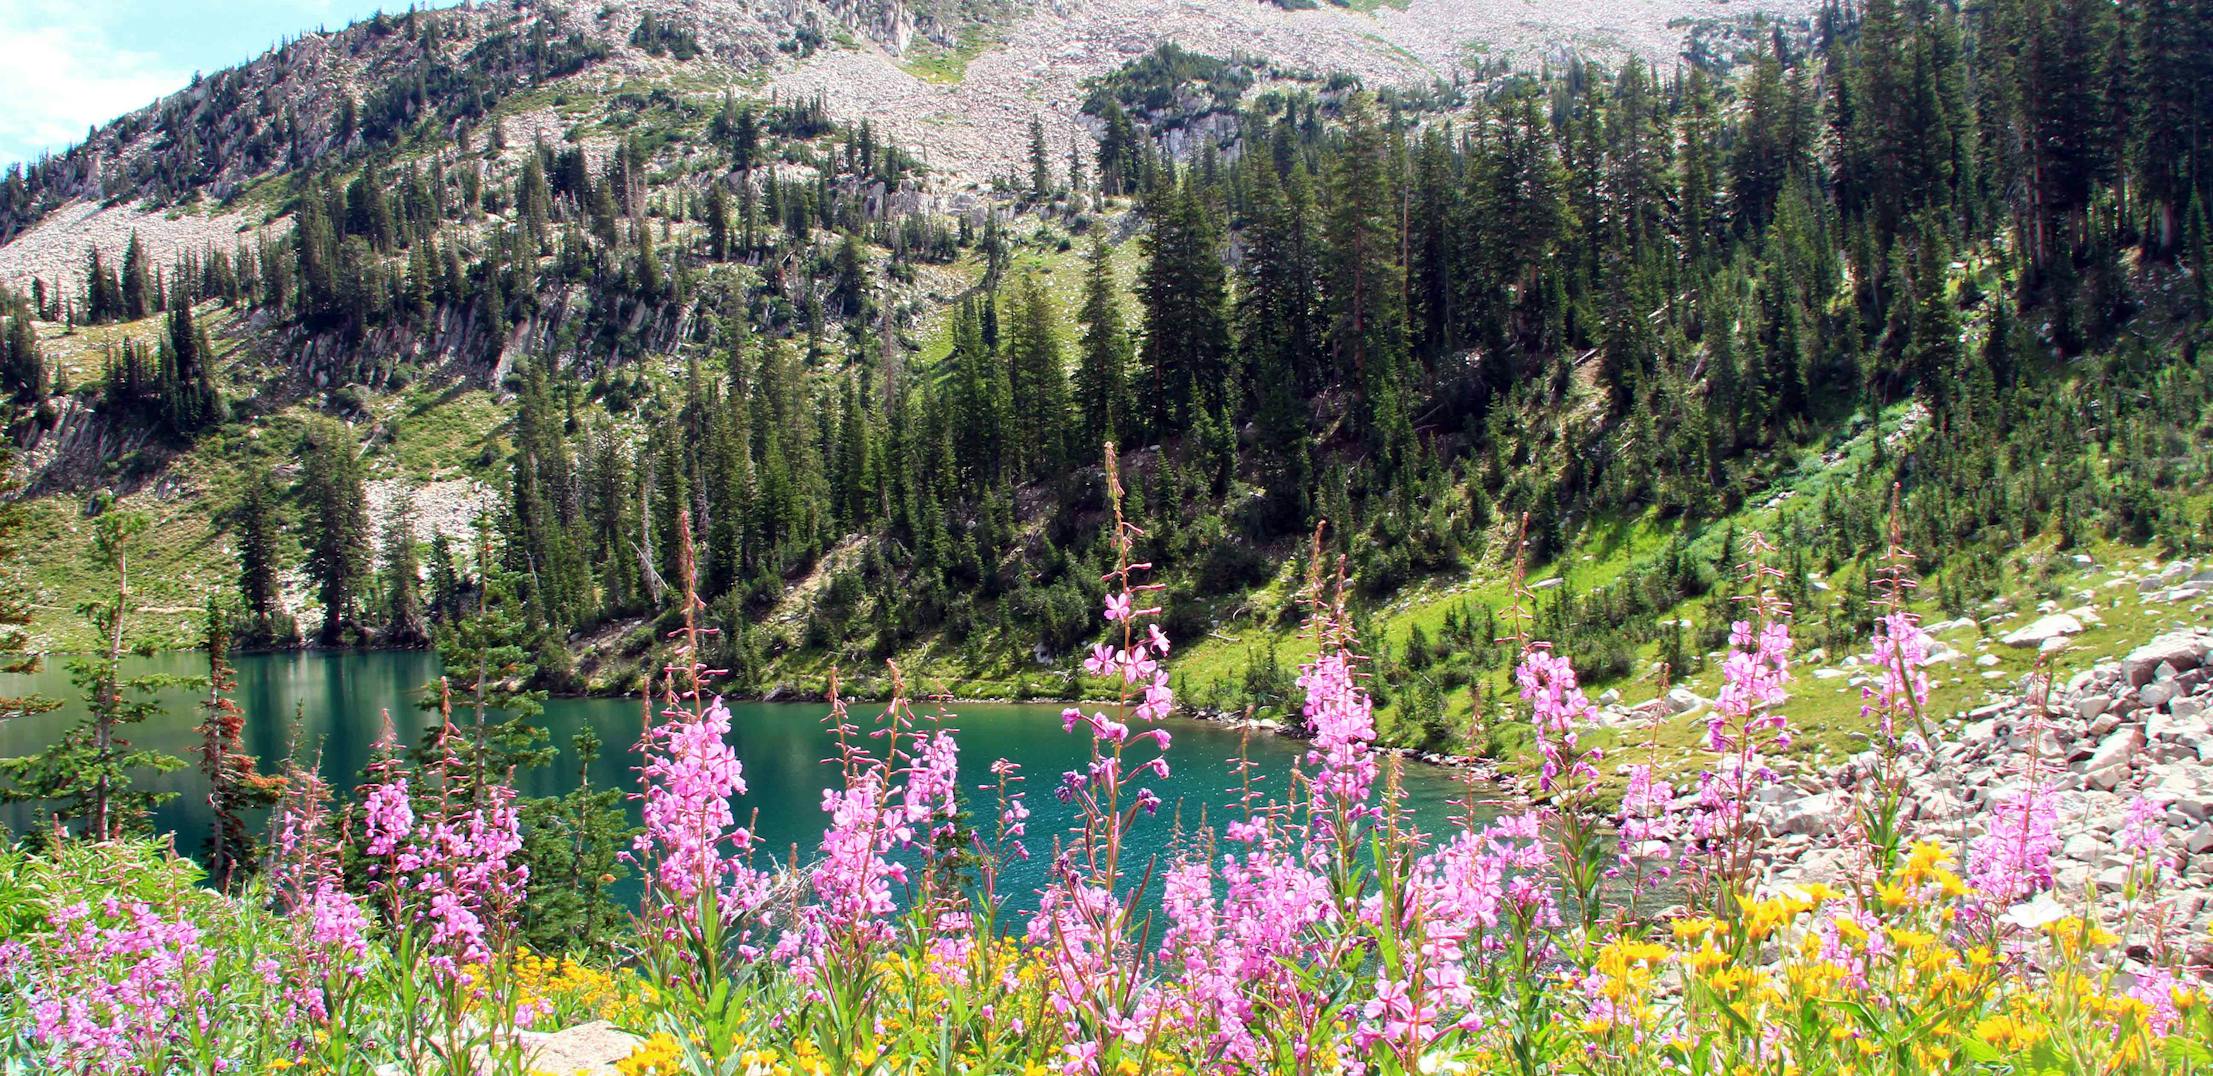 Pink wildflowers blooming near a lake in Uinta-Wasatch-Cache National Forest.